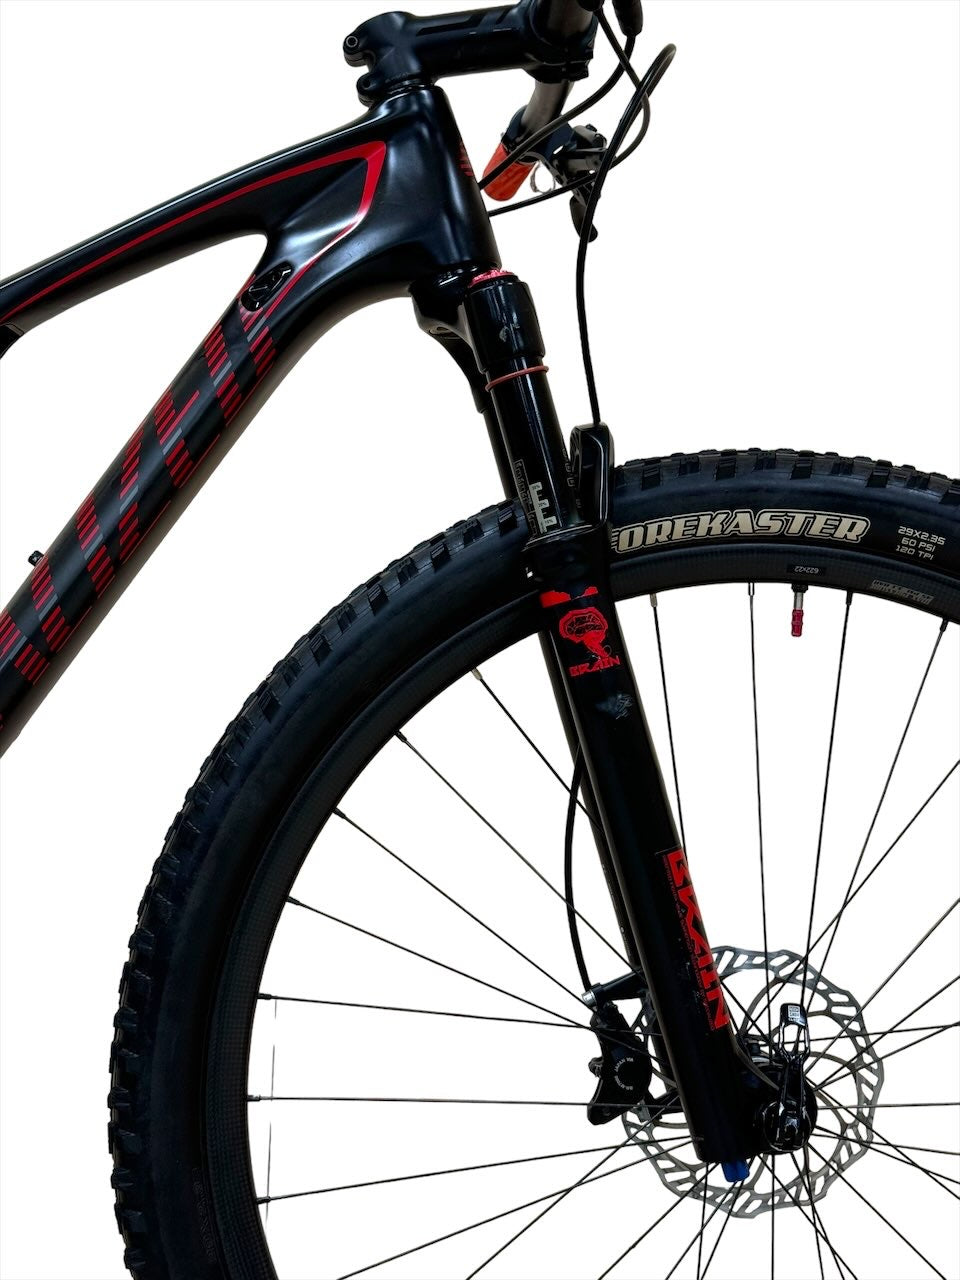 <tc>Specialized</tc> Epic Expert <tc>World Cup</tc> 29 tommer mountainbike